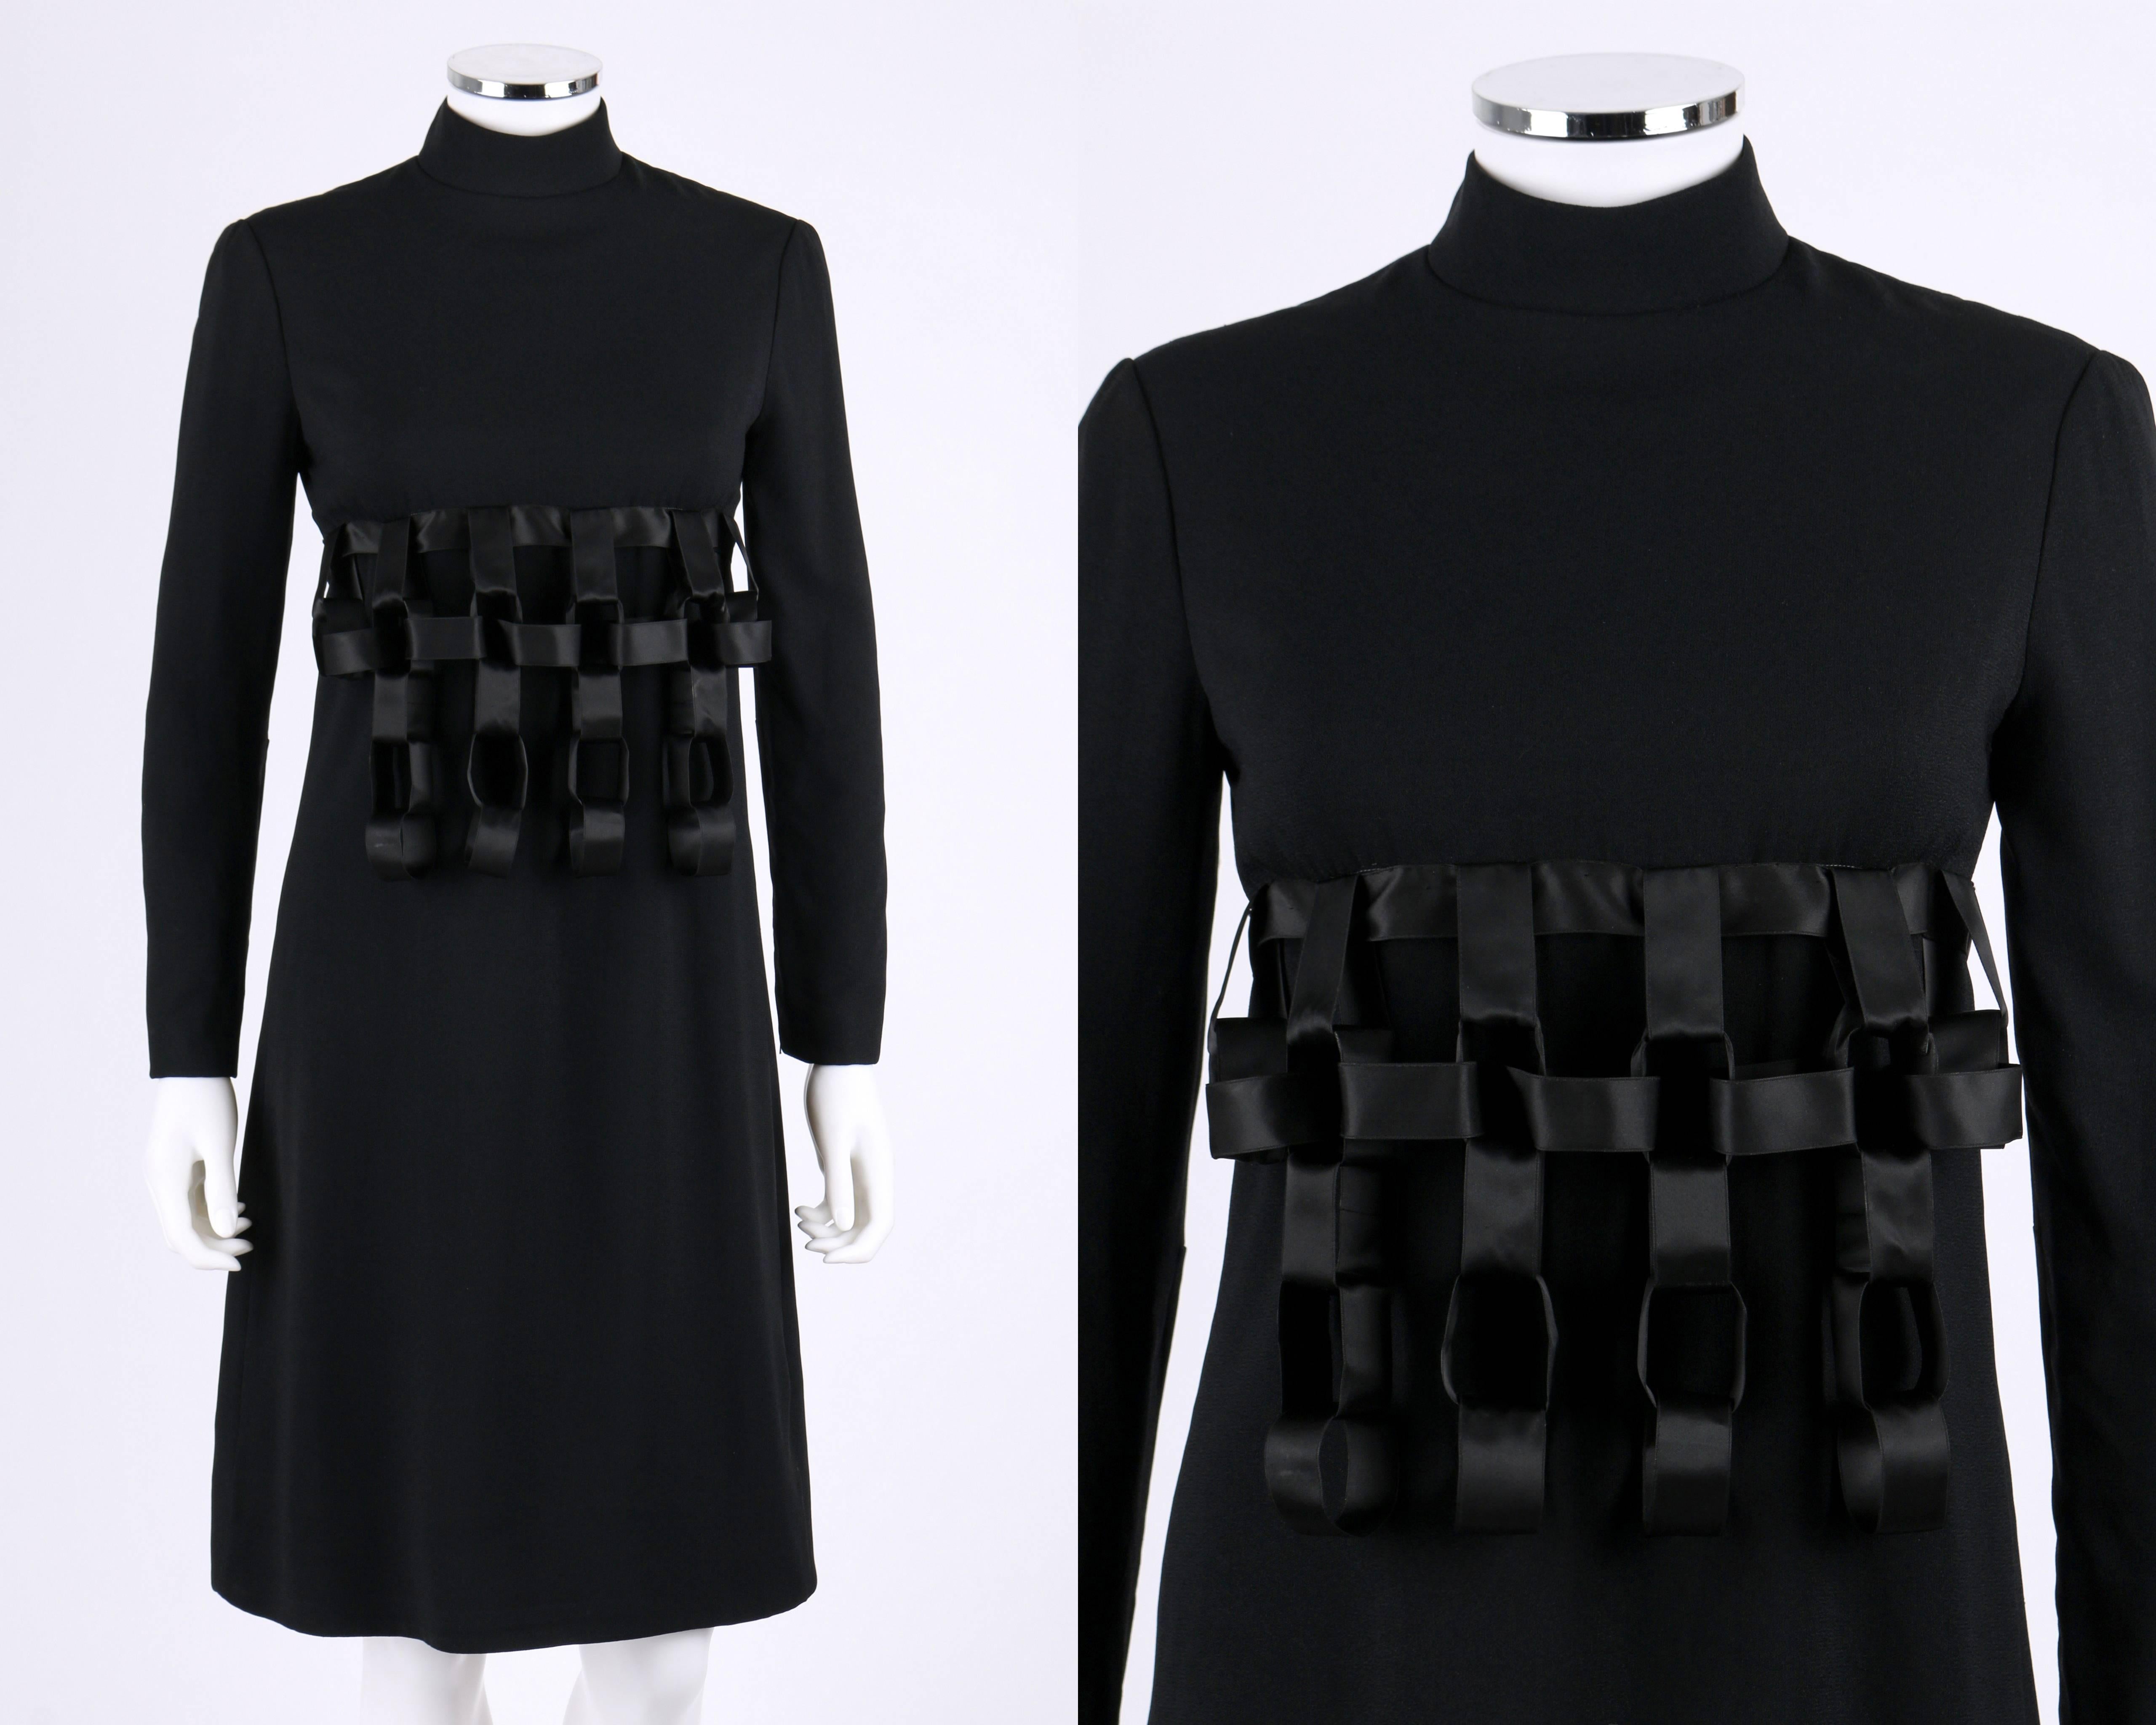 Geoffrey Beene c.1960's black wool architectural ribbon chain dress, originally sold at Dayton's Oval Room. Long sleeves. Mandarin collar. Empire waist. Three dimensional ribbon chain cage in front, ribbon tie in back. Back zipper closure with hook